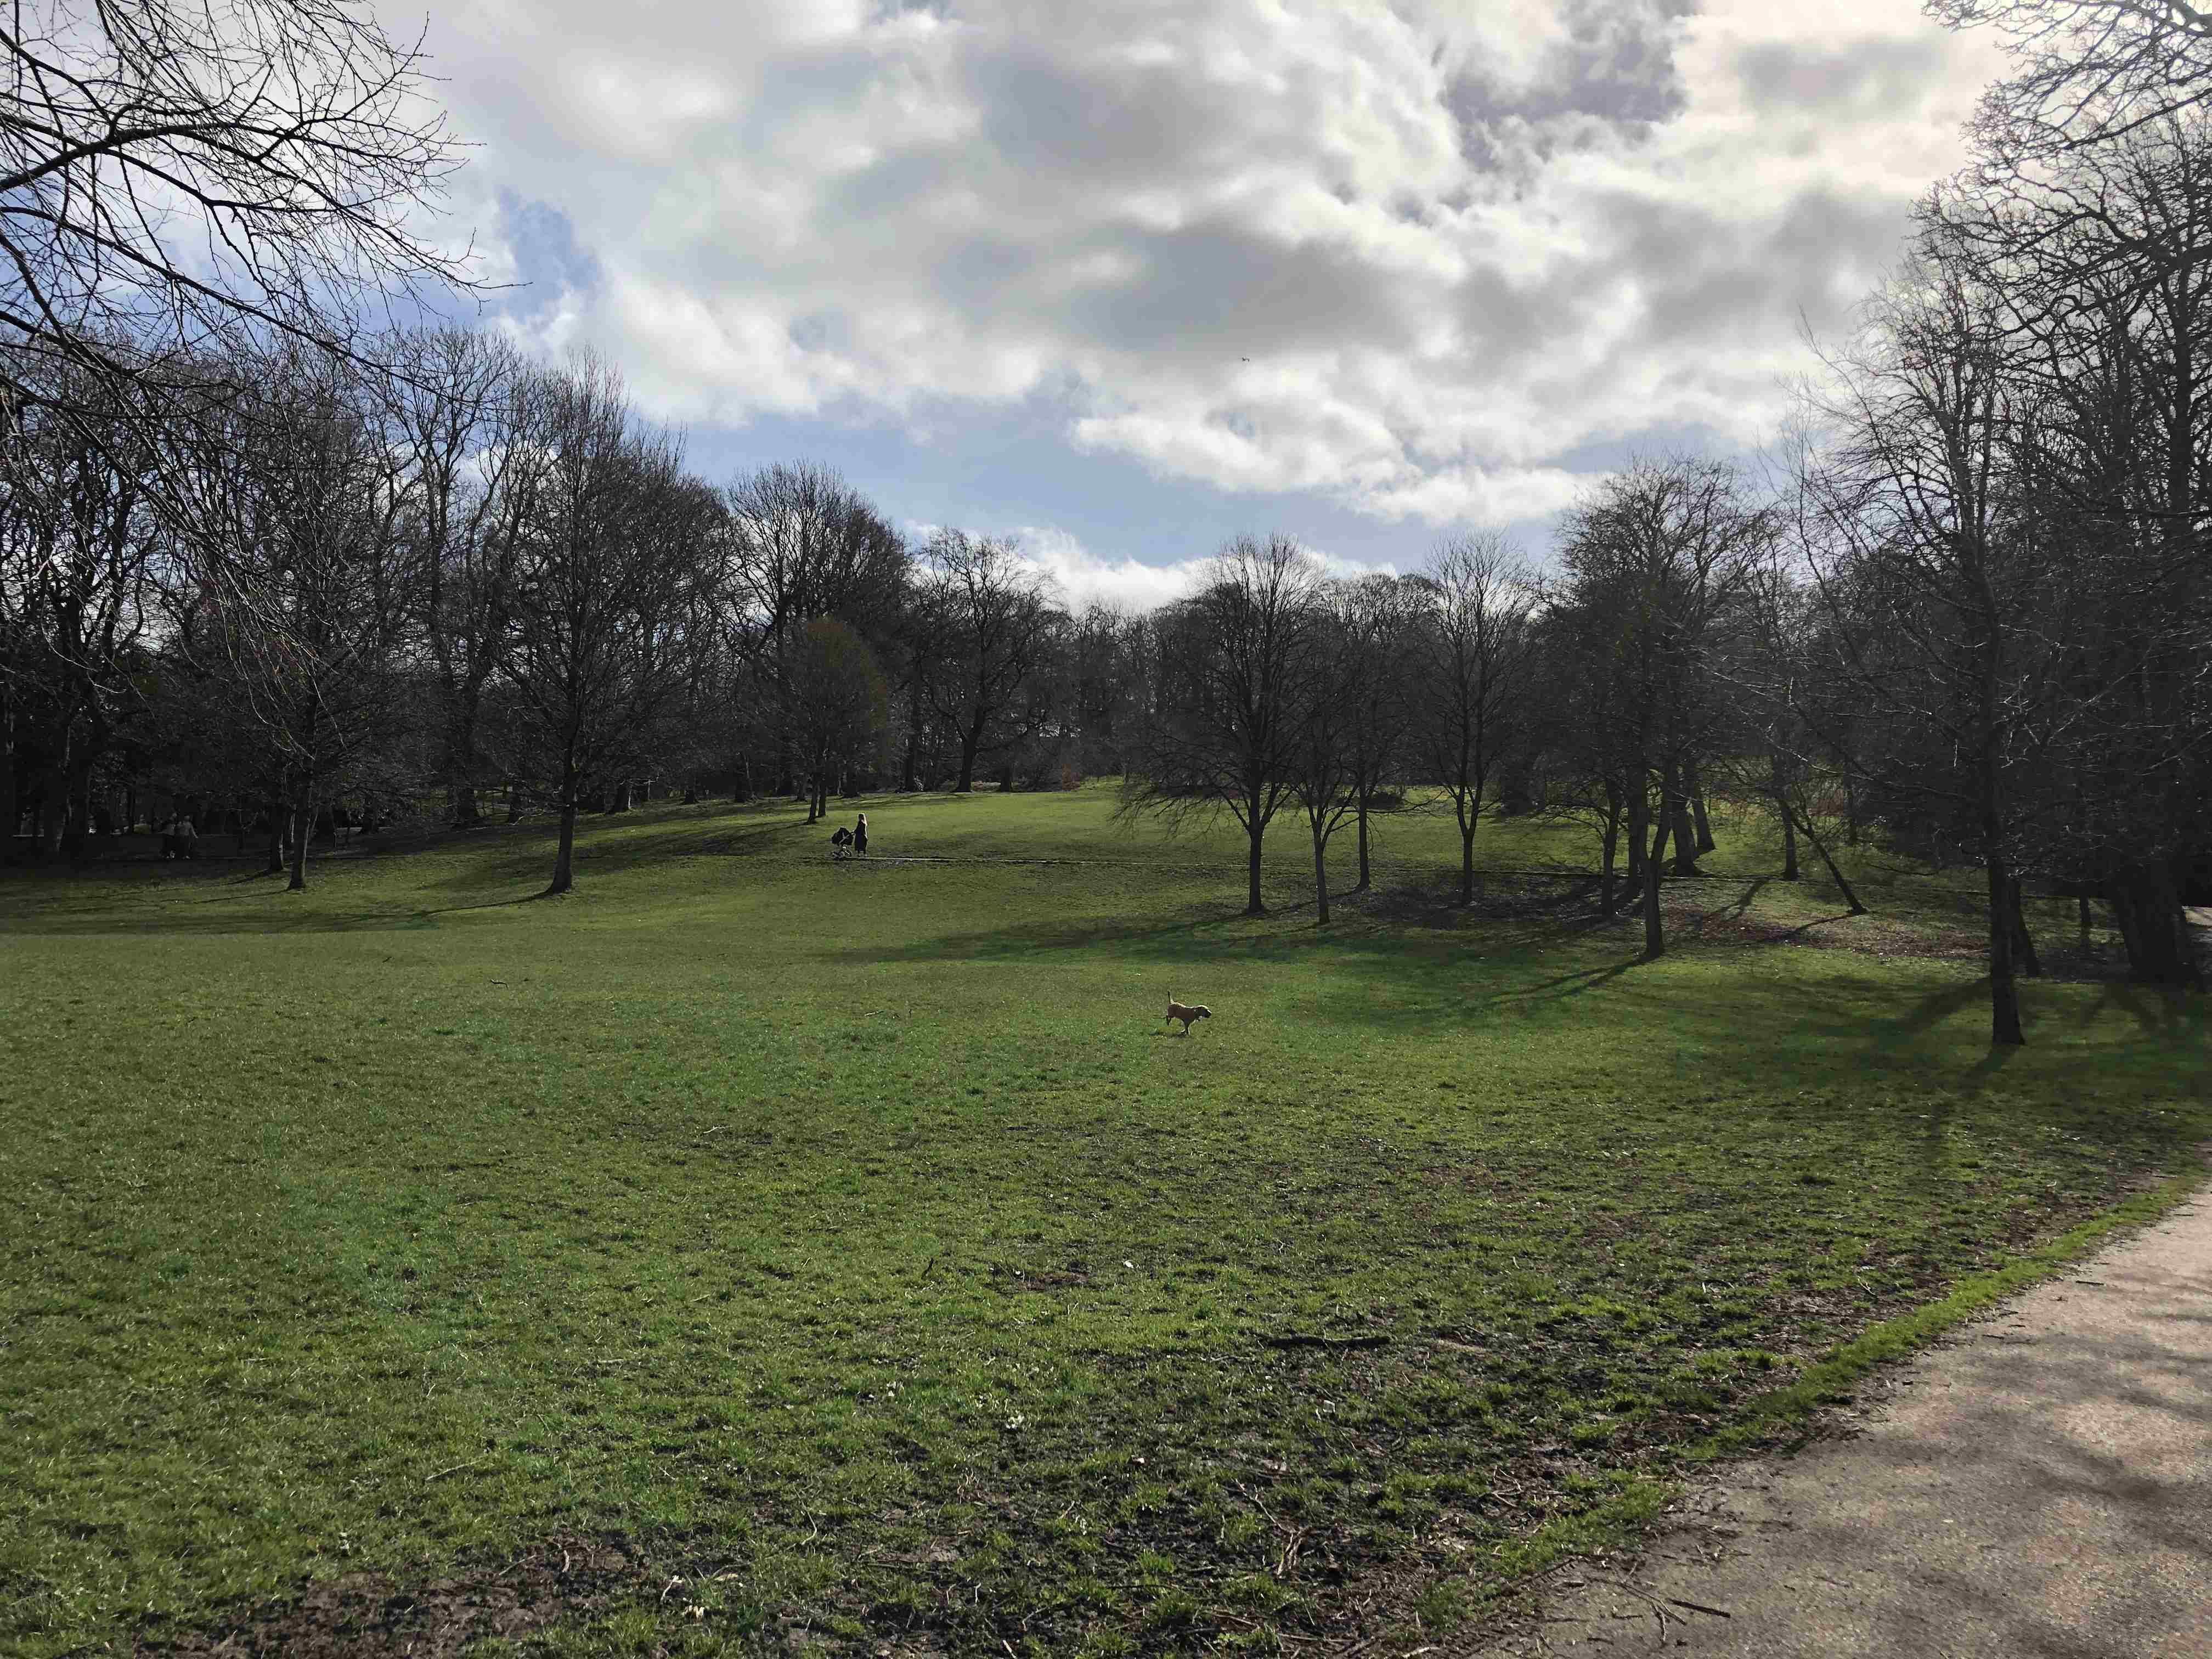 Someone pushing a pram and a dog running in Queens Park in Glasgow. It is a partly cloudy day.